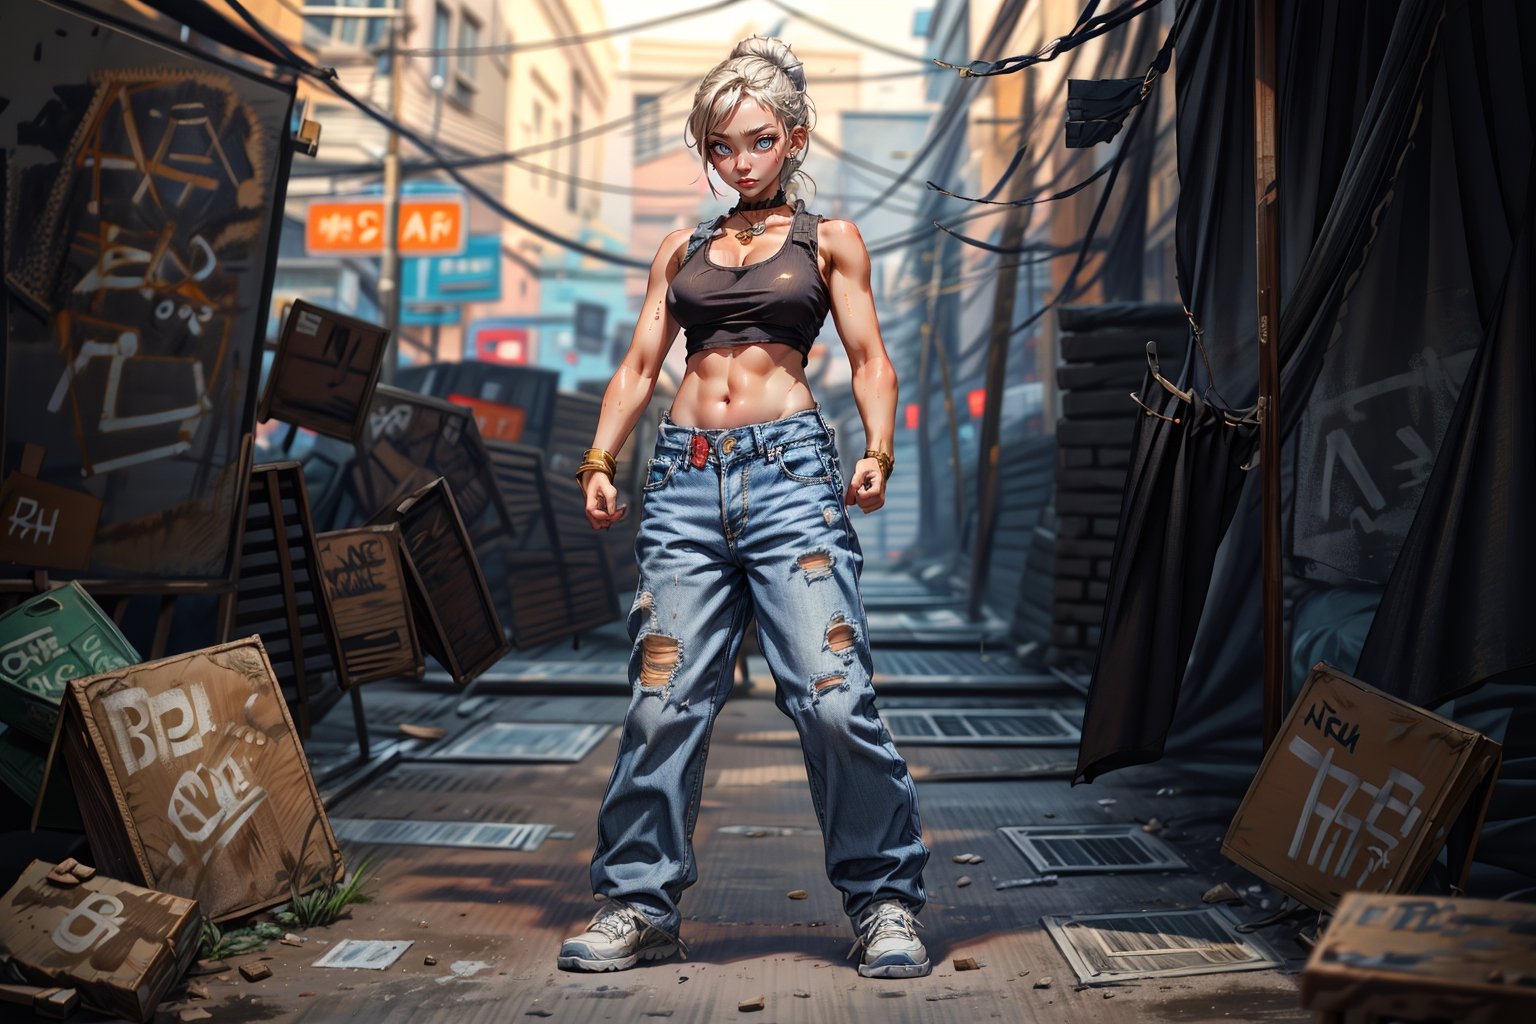 solo_female, perfect proportions, street dancer, shuffle dance, baggy jeans, sneakers, white tank-top, jewelery, standing in front of cinderblock wall, rubble, graffitti, Young beauty spirit ,photo of perfecteyes eyes,JeeSoo ,